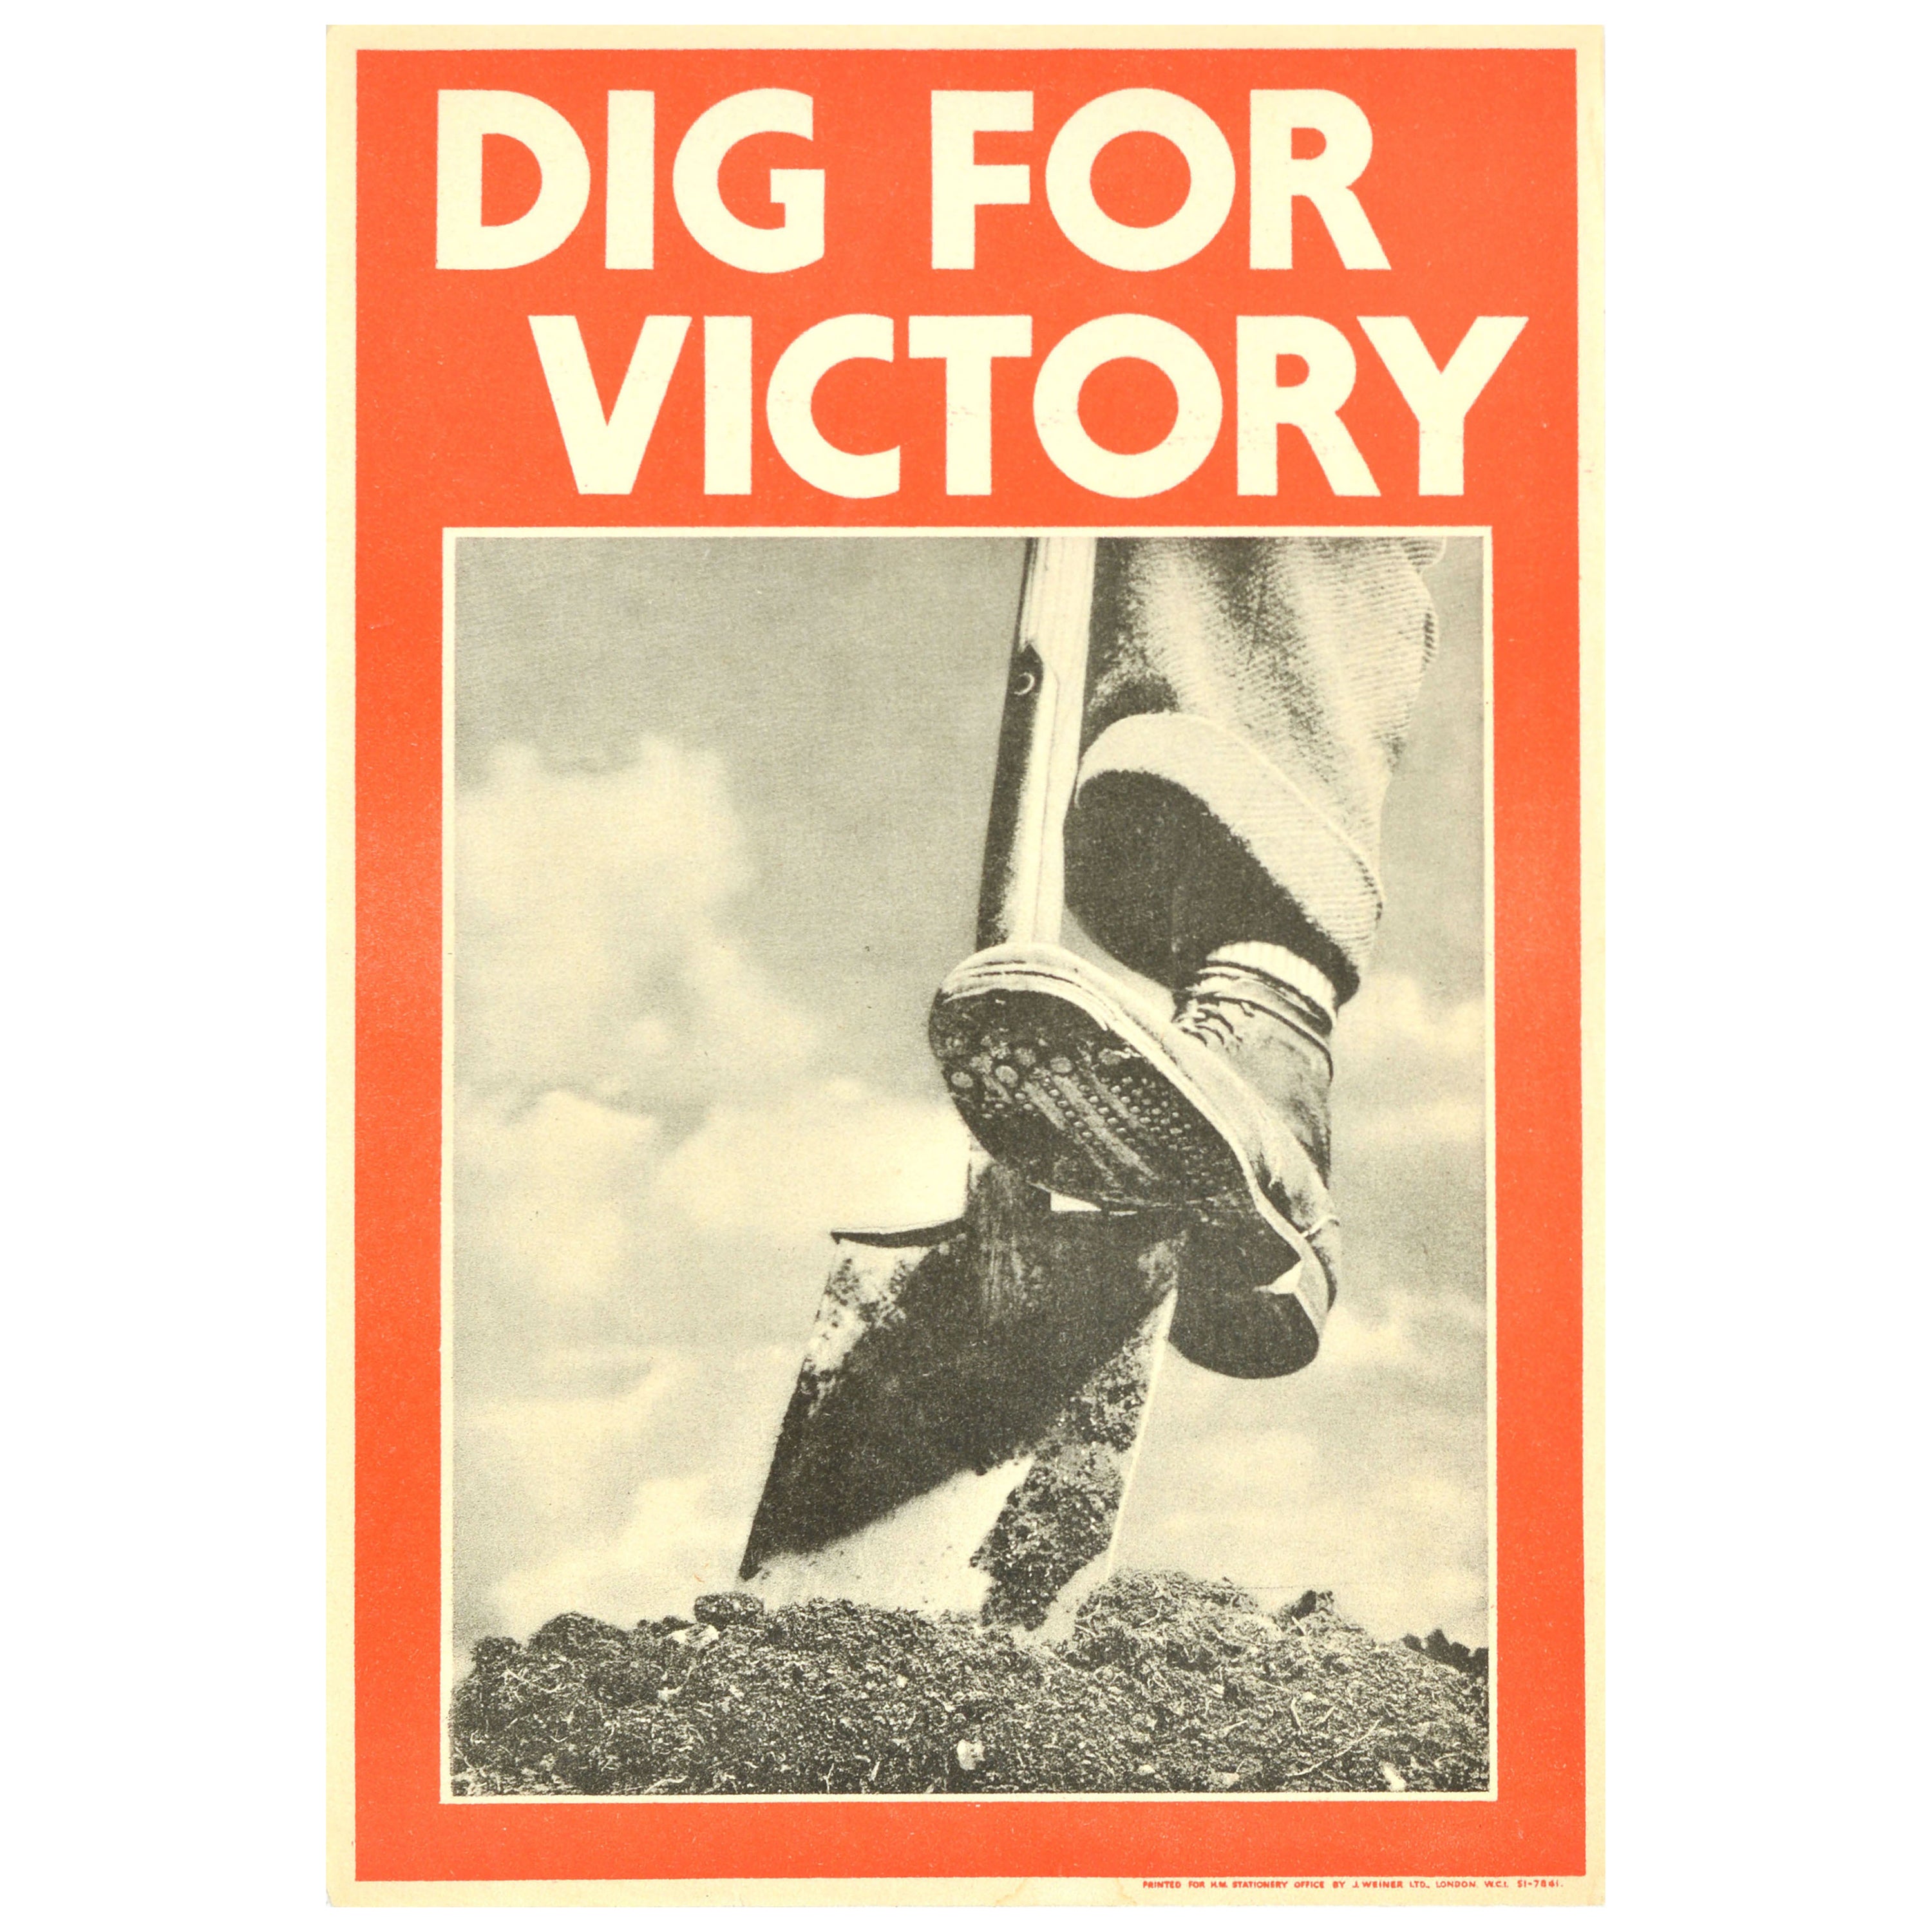 Original Vintage World War Two Propaganda Poster Dig For Victory WWII Home Front For Sale